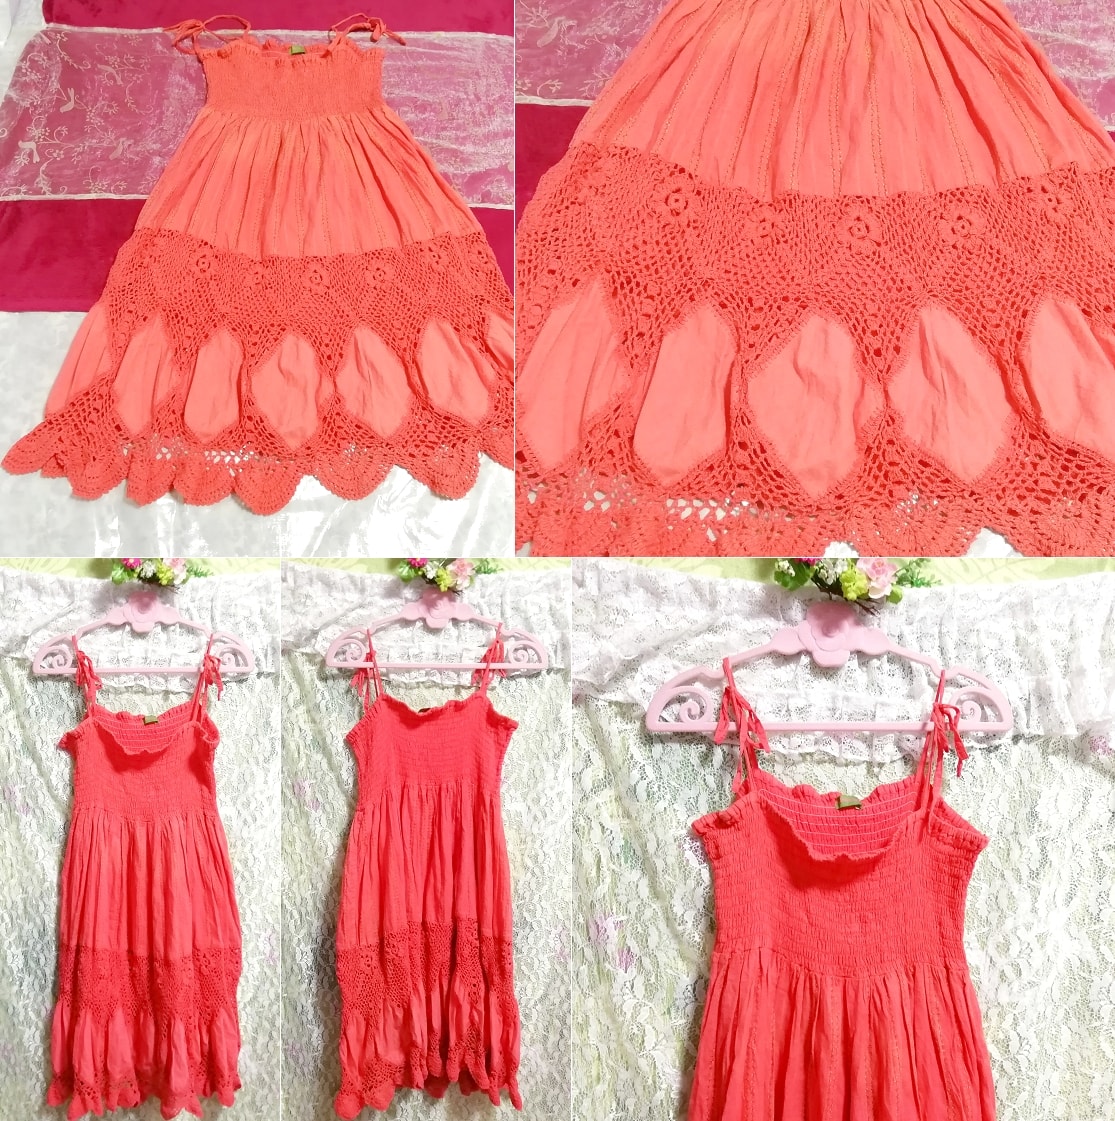 Red pink 100% cotton negligee nightgown camisole dress made in india, knee length skirt, m size